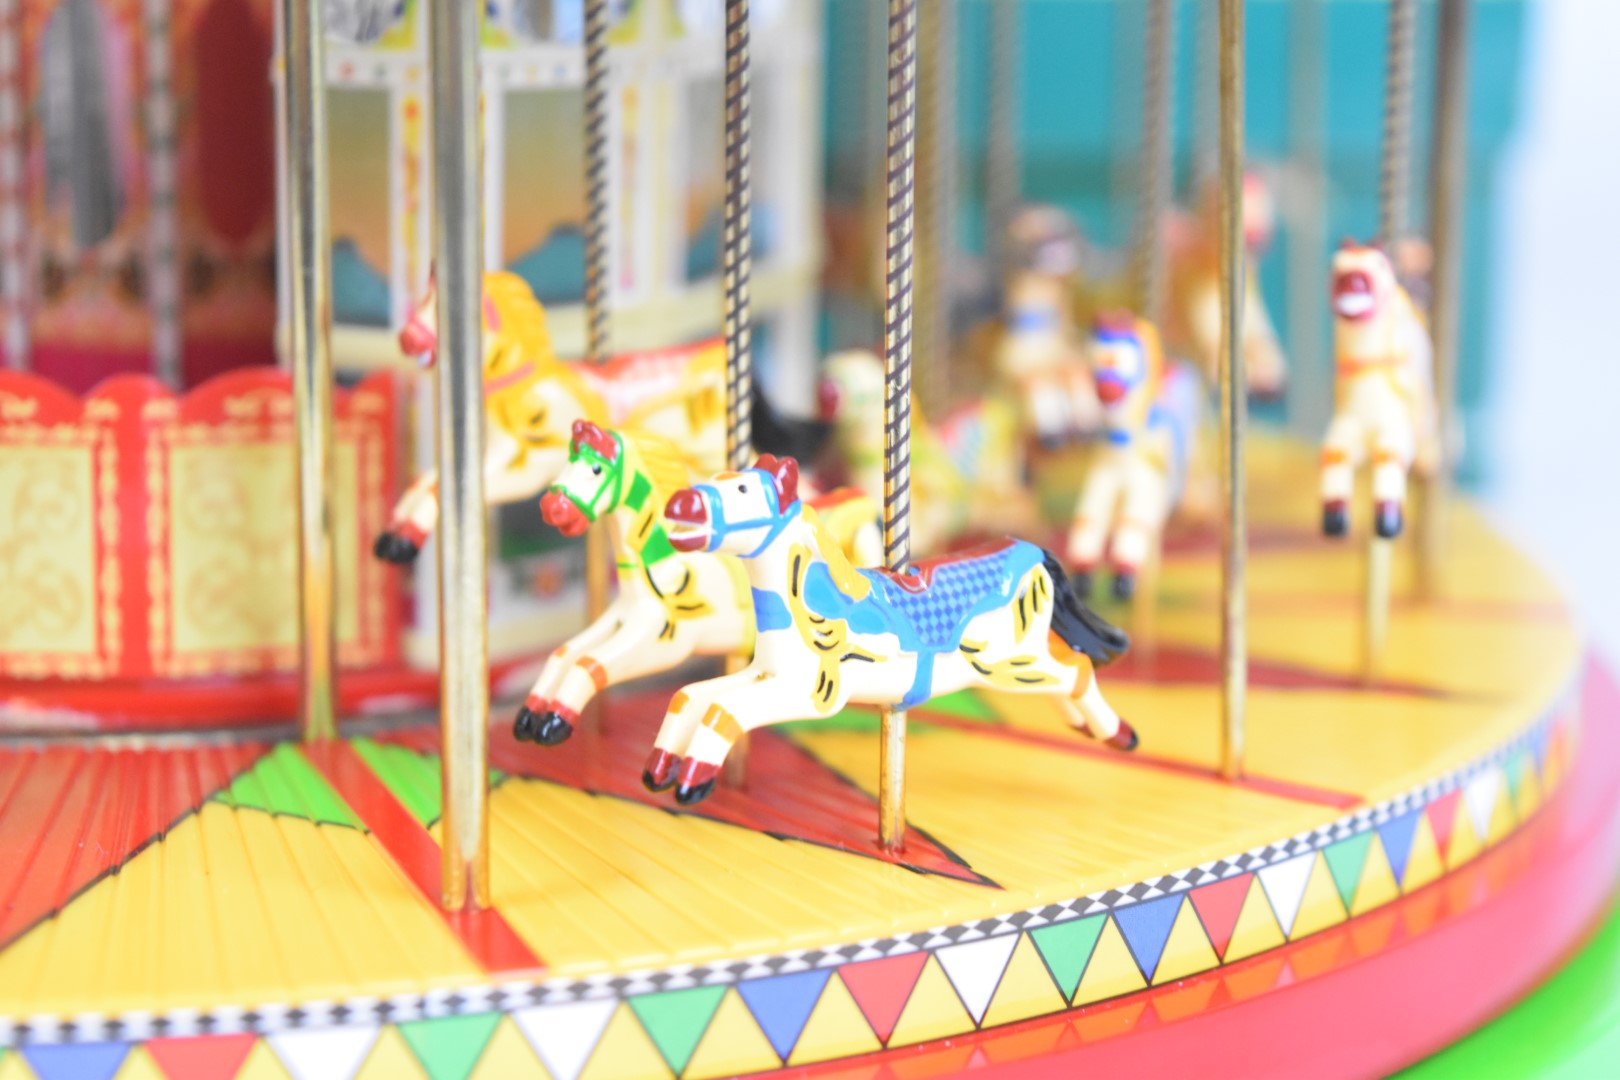 Corgi Fairground Attractions The South Down Gallopers 1:50 scale diecast model carousel, CC20401, in - Image 5 of 6